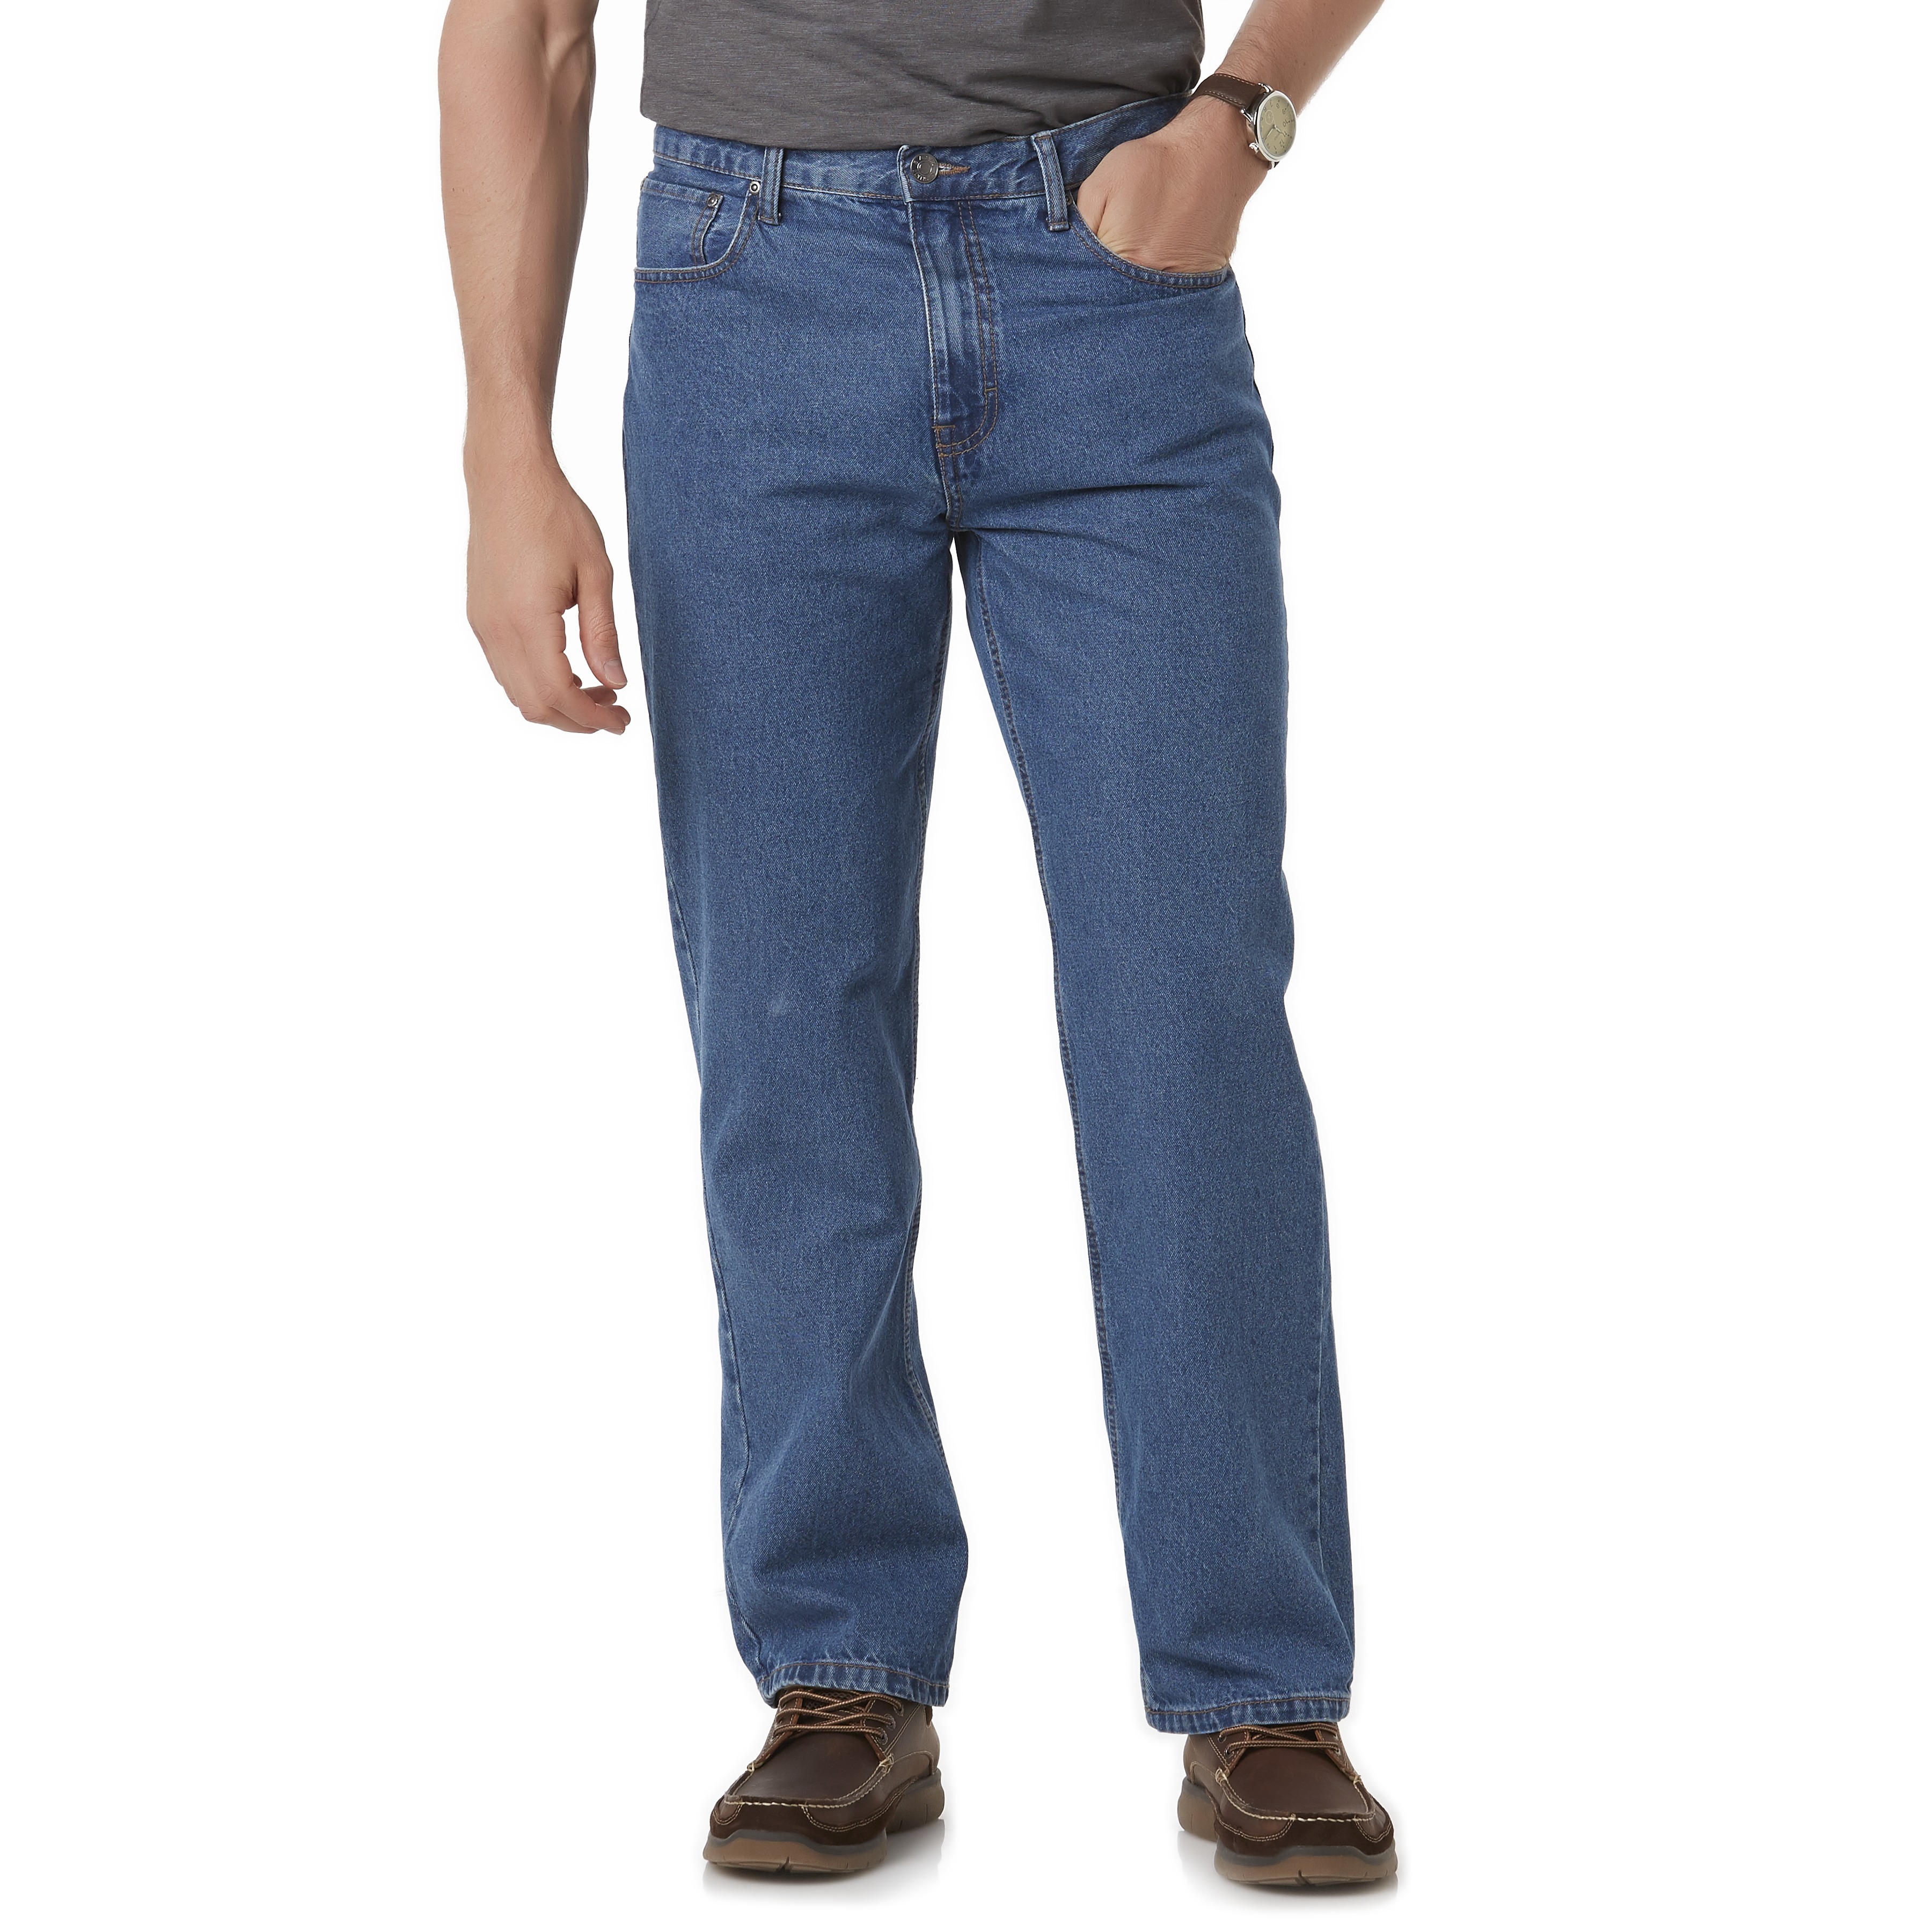 Basic Editions Big & Tall Men's Relaxed Fit Jeans | Shop Your Way ...